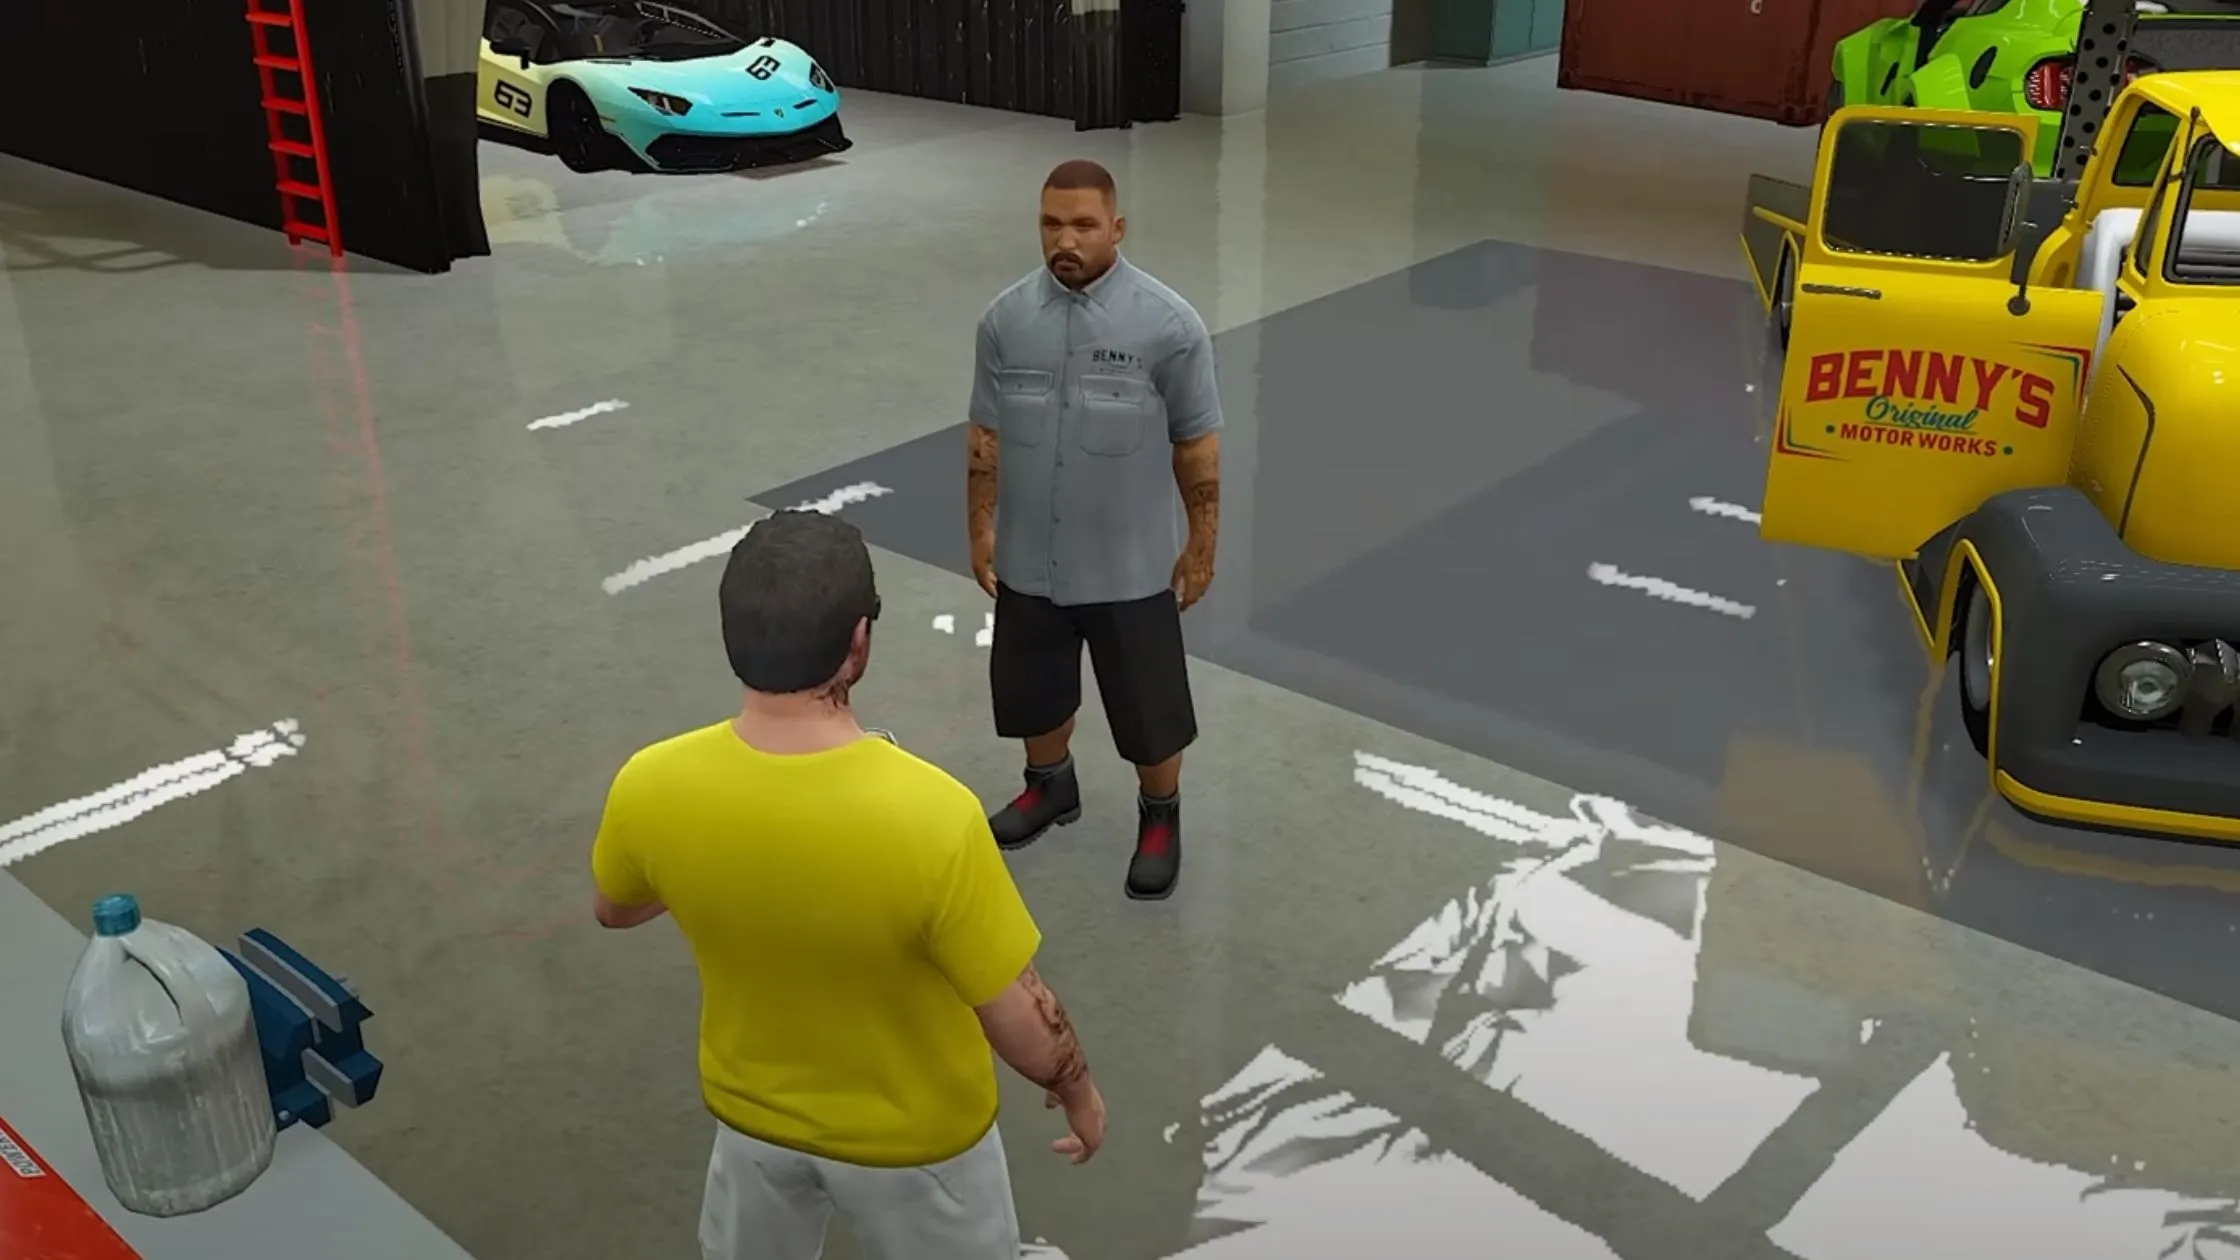 GTA 6 Leaks: Exclusive Insights and Rumors Unveiled